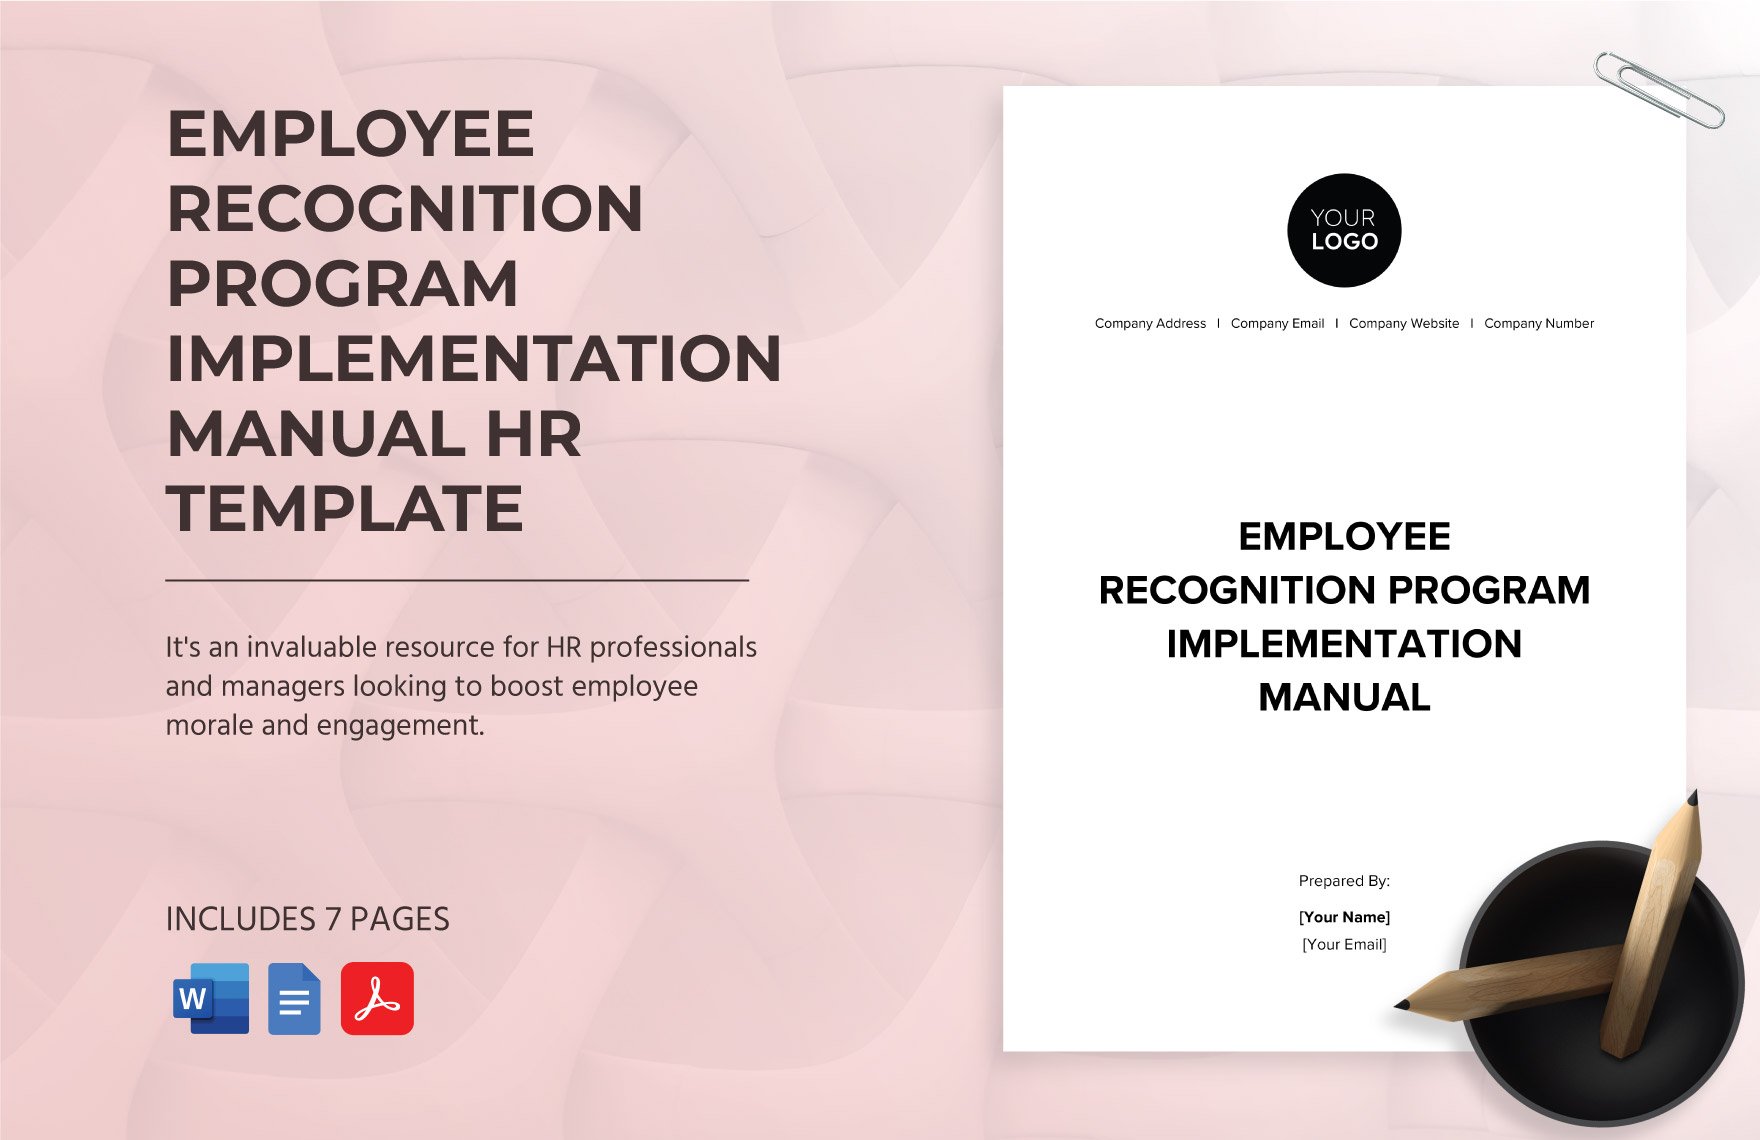 Employee Recognition Program Implementation Manual HR Template